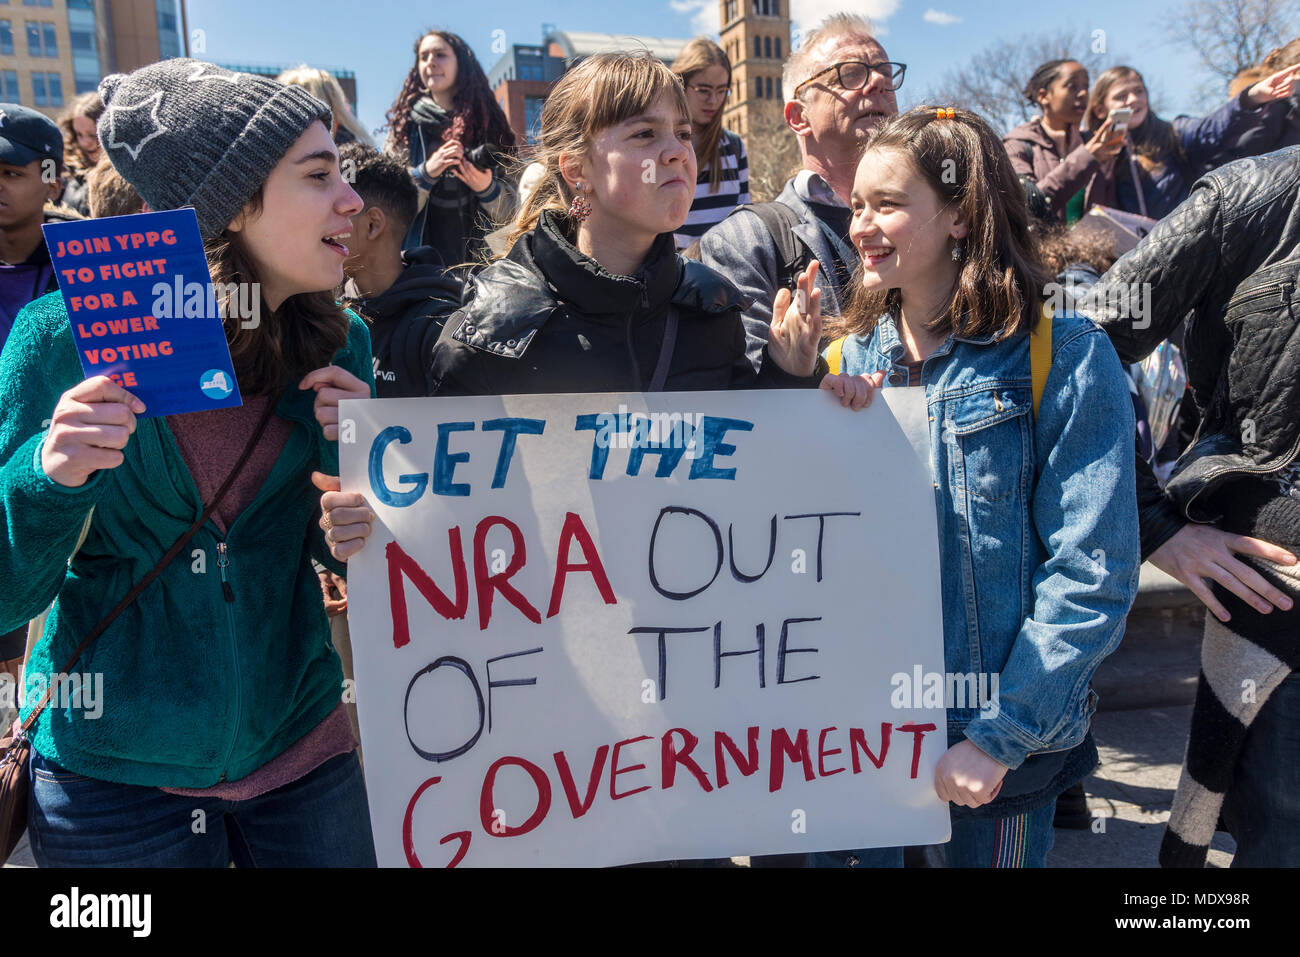 New York, NY- 20 April 2018 - NATIONAL STUDENT WALK-OUT Students walked out of class to mark the 19th anniversary of the Columbine School shooting. Several thousand rallied in Washington Square Park calling for stiffer gun control measures including a ban on assault weapons and a universal background check. CREDIT: ©Stacy Walsh Rosenstock/Alamy Live News Stock Photo